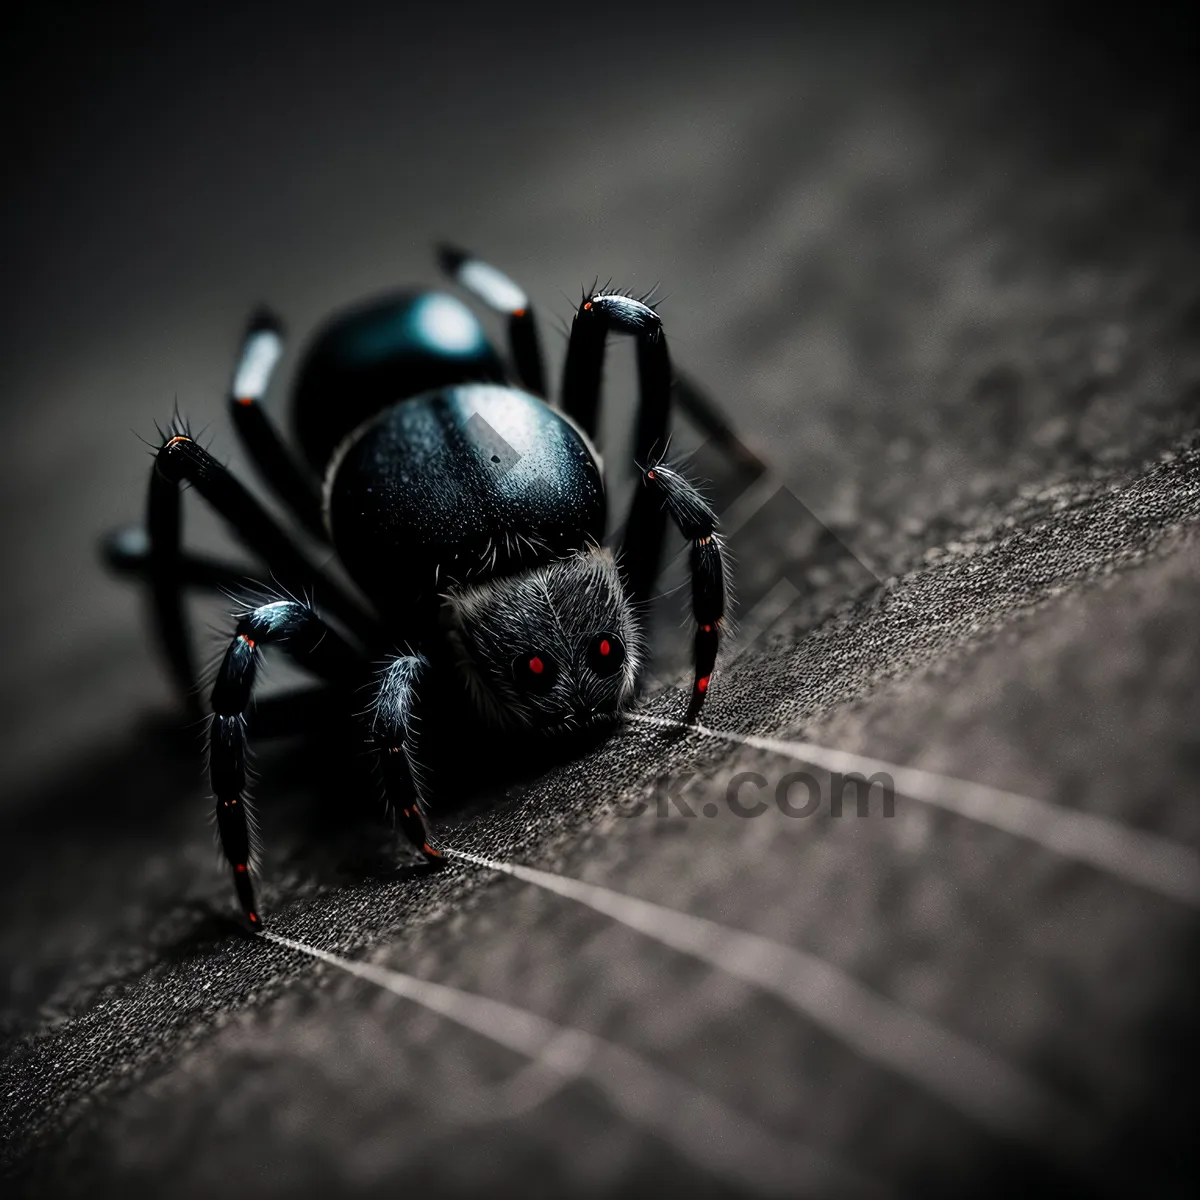 Picture of Close-up of a Black Widow Spider on a Leaf.